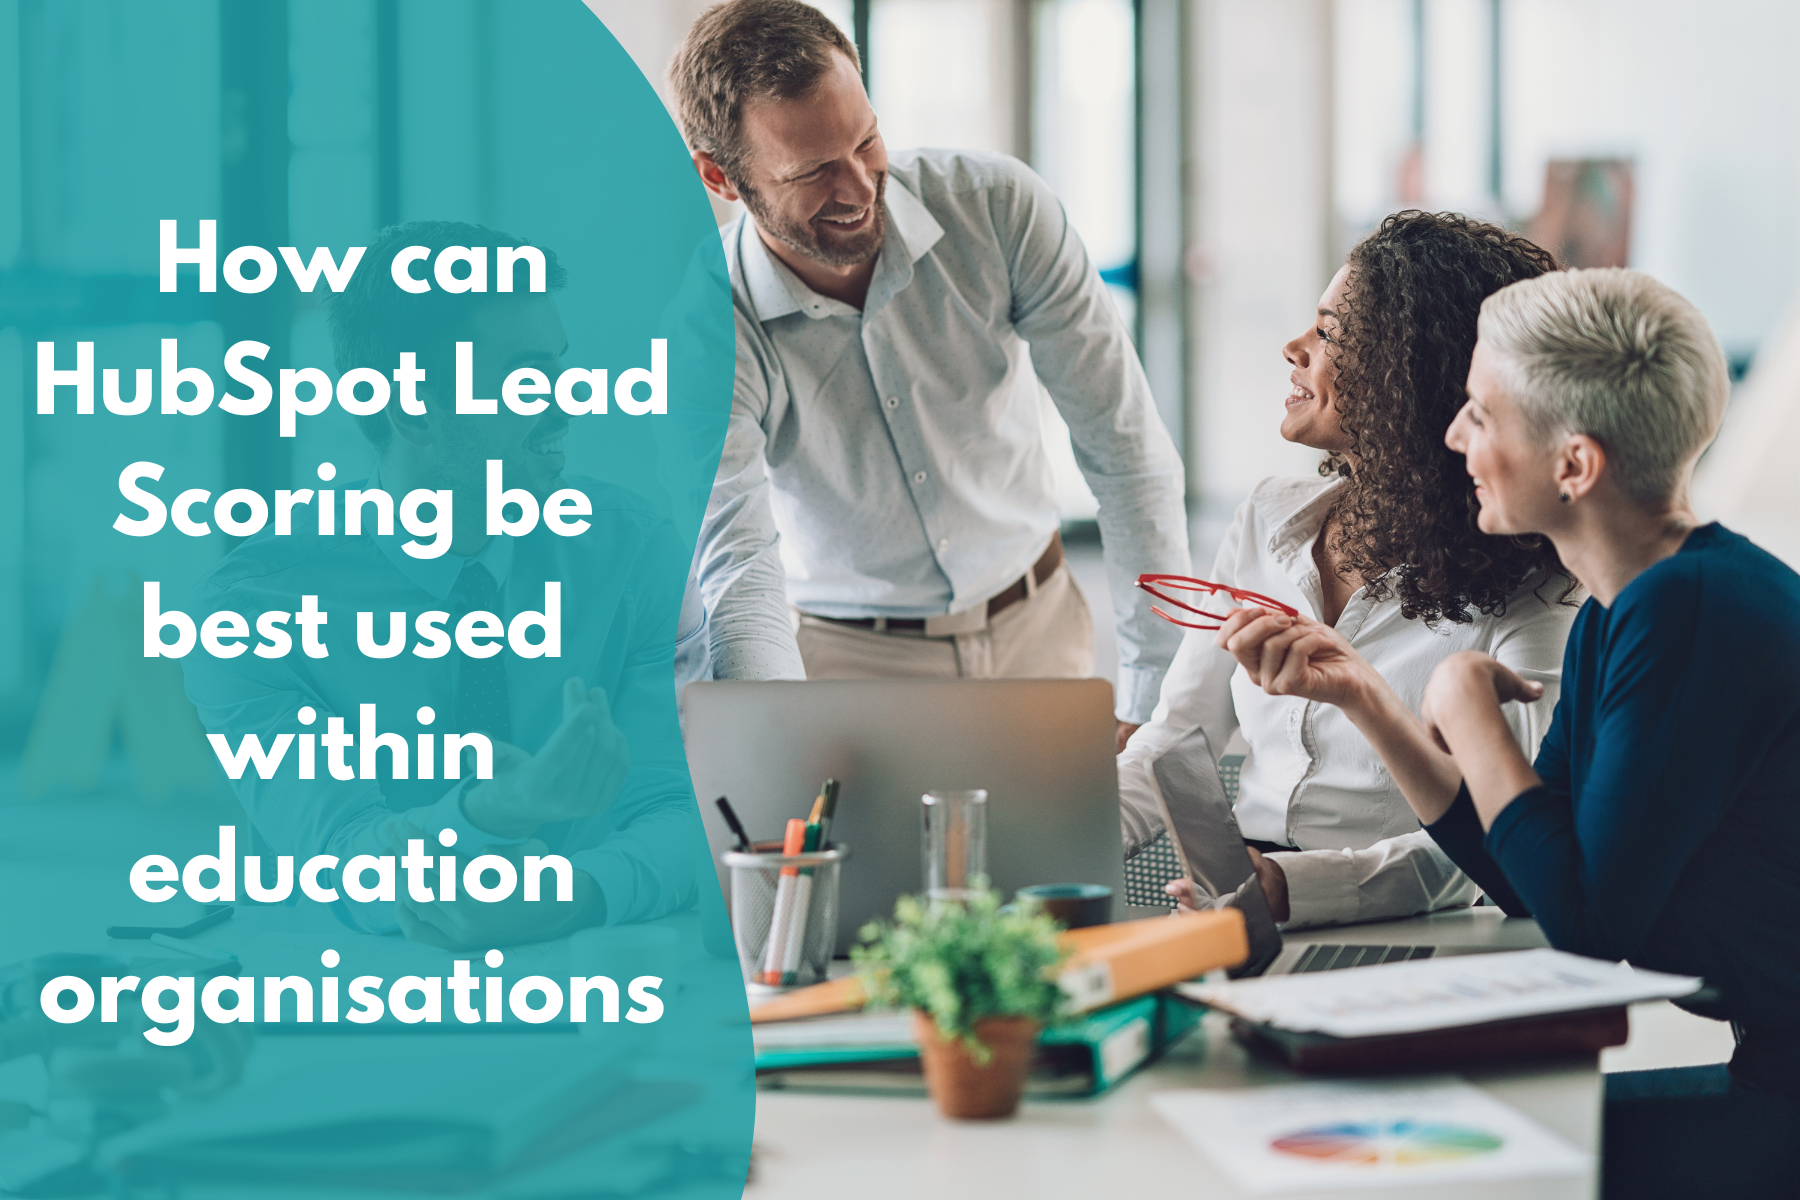 How can HubSpot Lead Scoring be best used within education organisations?